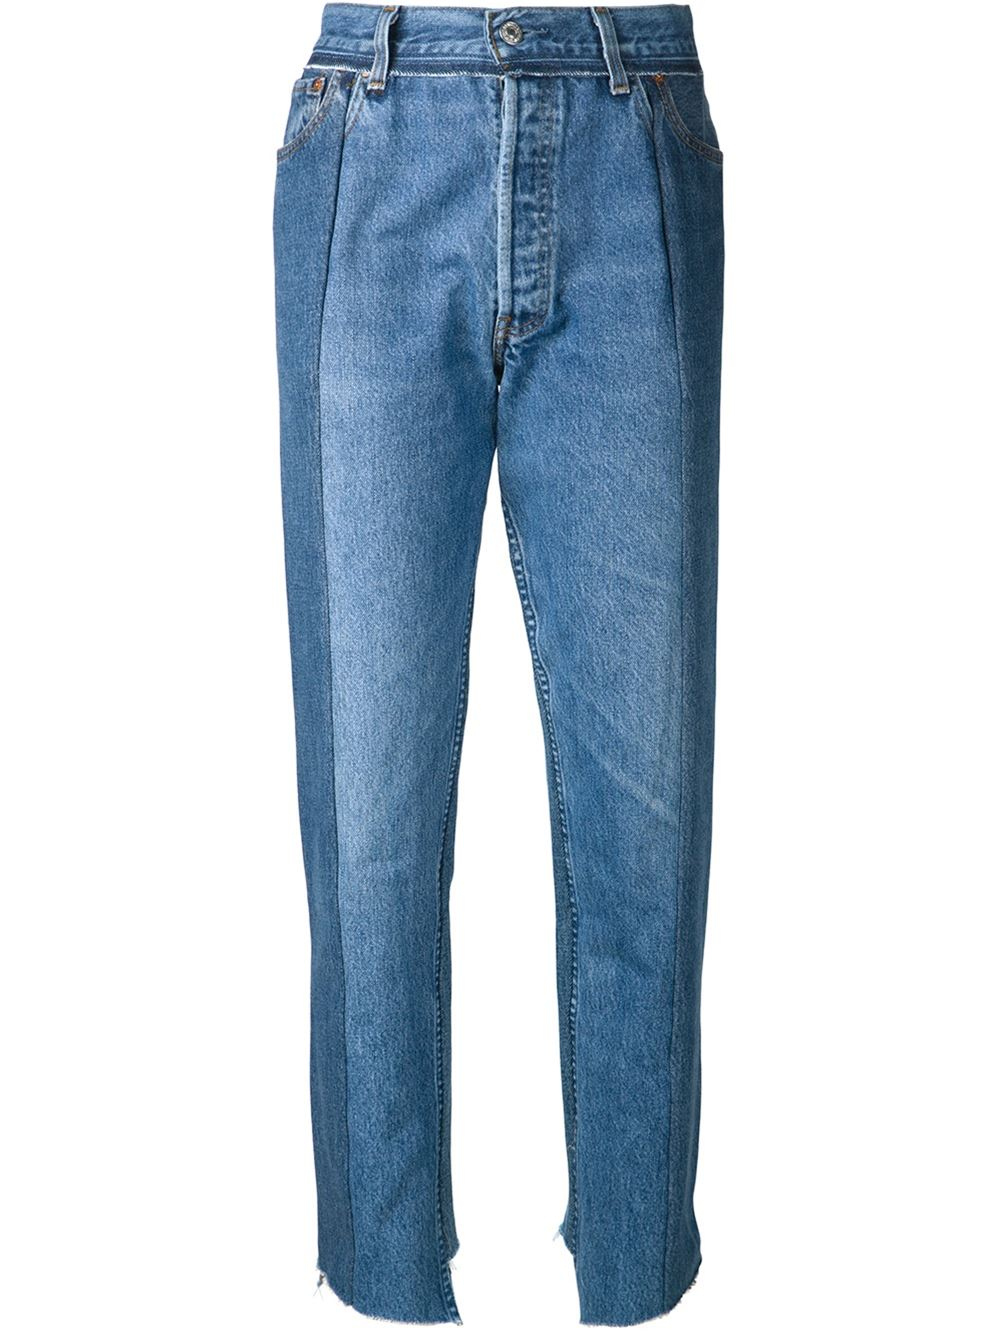 Lyst - Vetements Back Patchwork Jeans in Blue